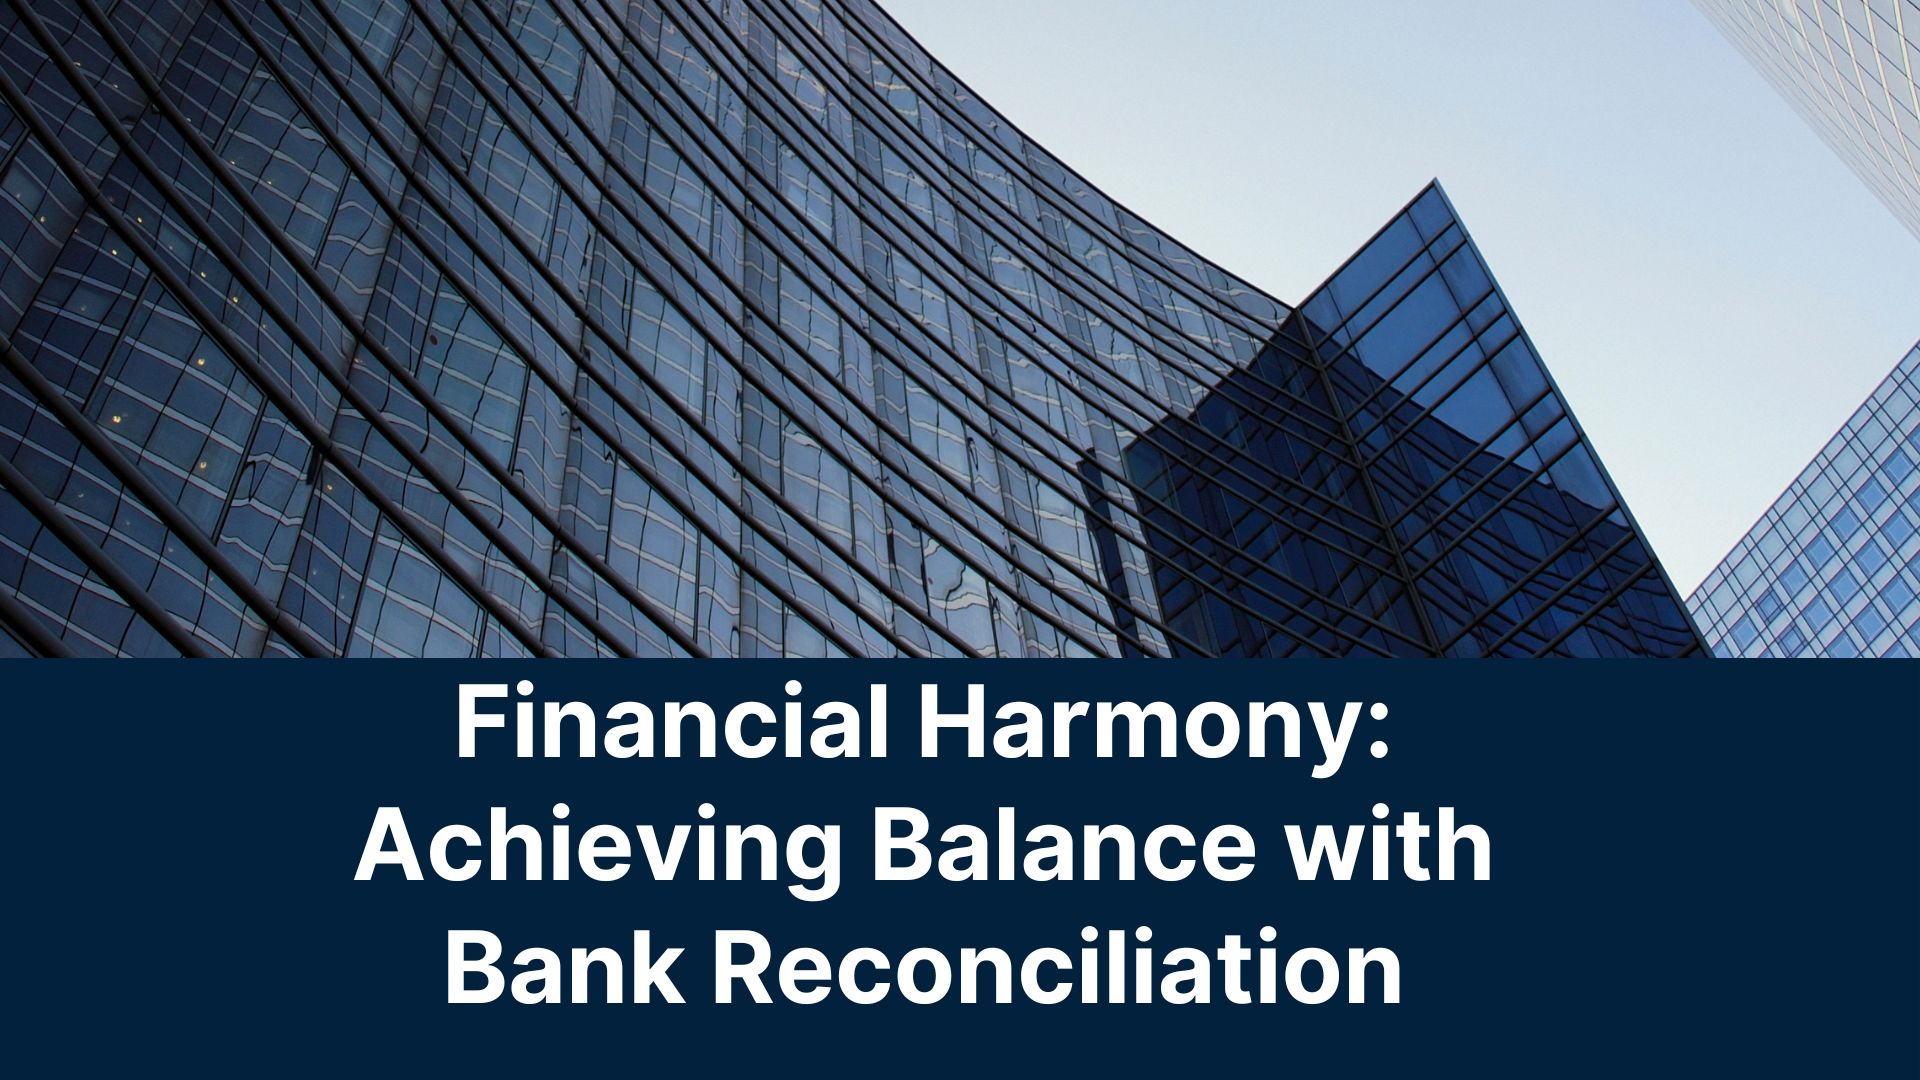 Financial Harmony: Achieving Balance with Bank Reconciliation